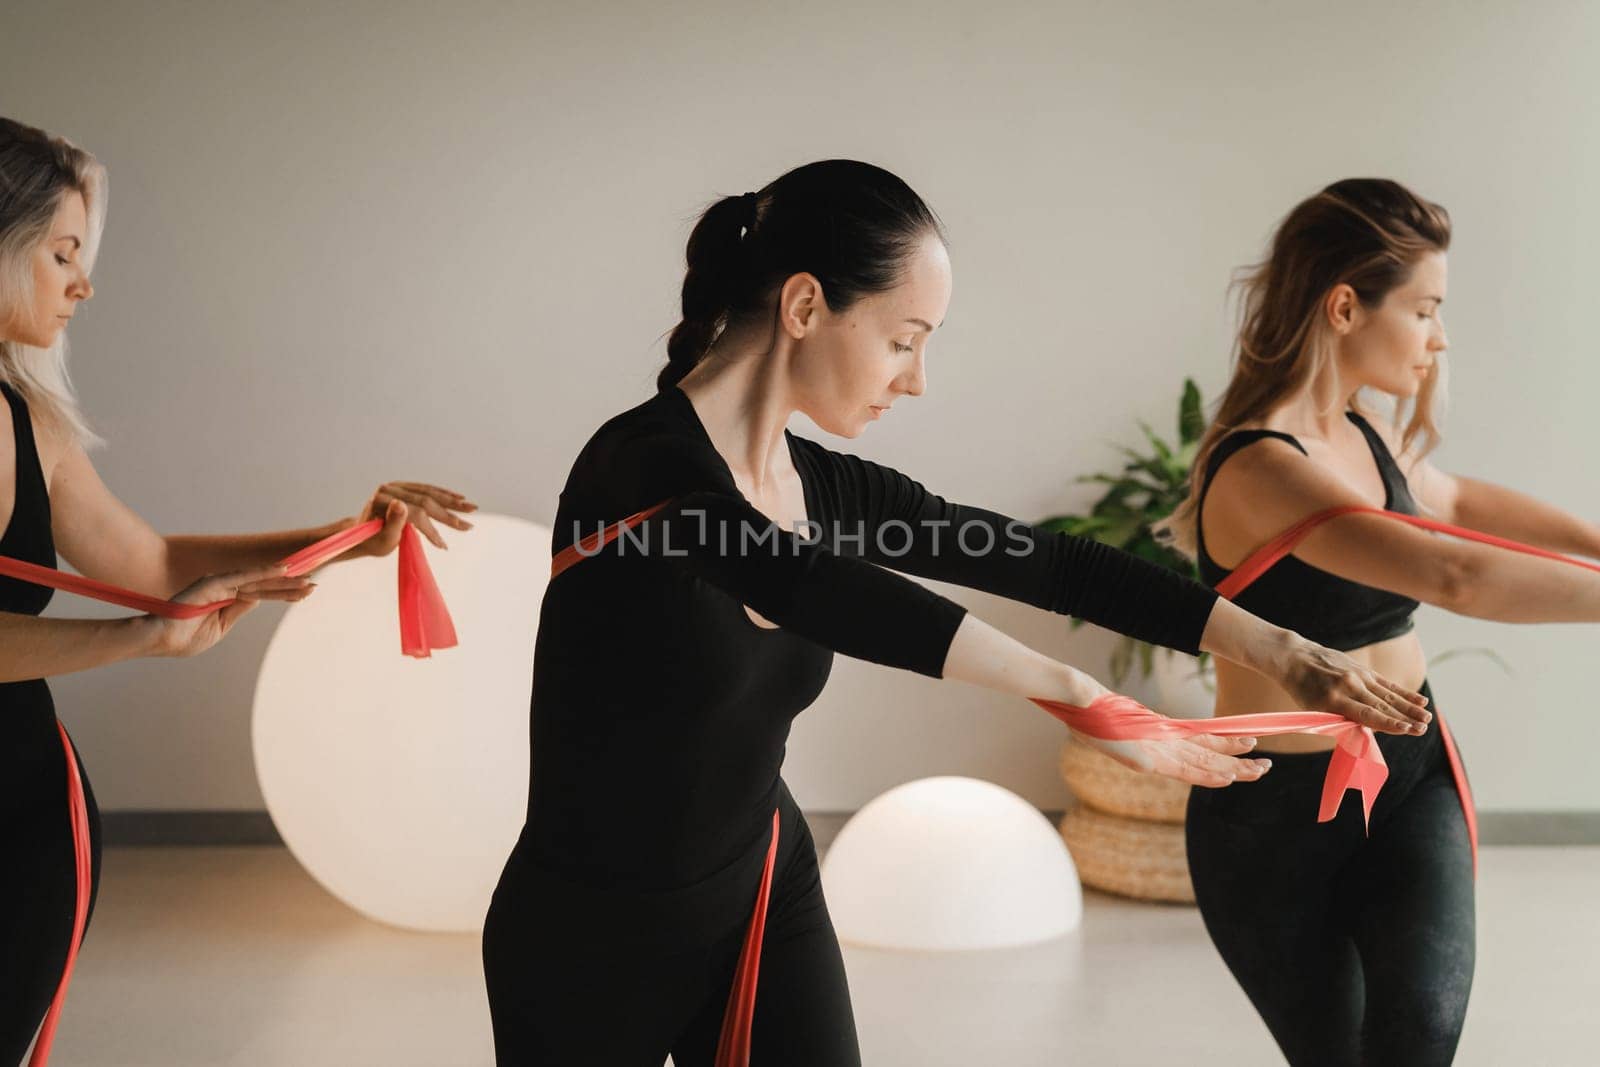 Girls in black are doing fitness with red ribbons indoors.